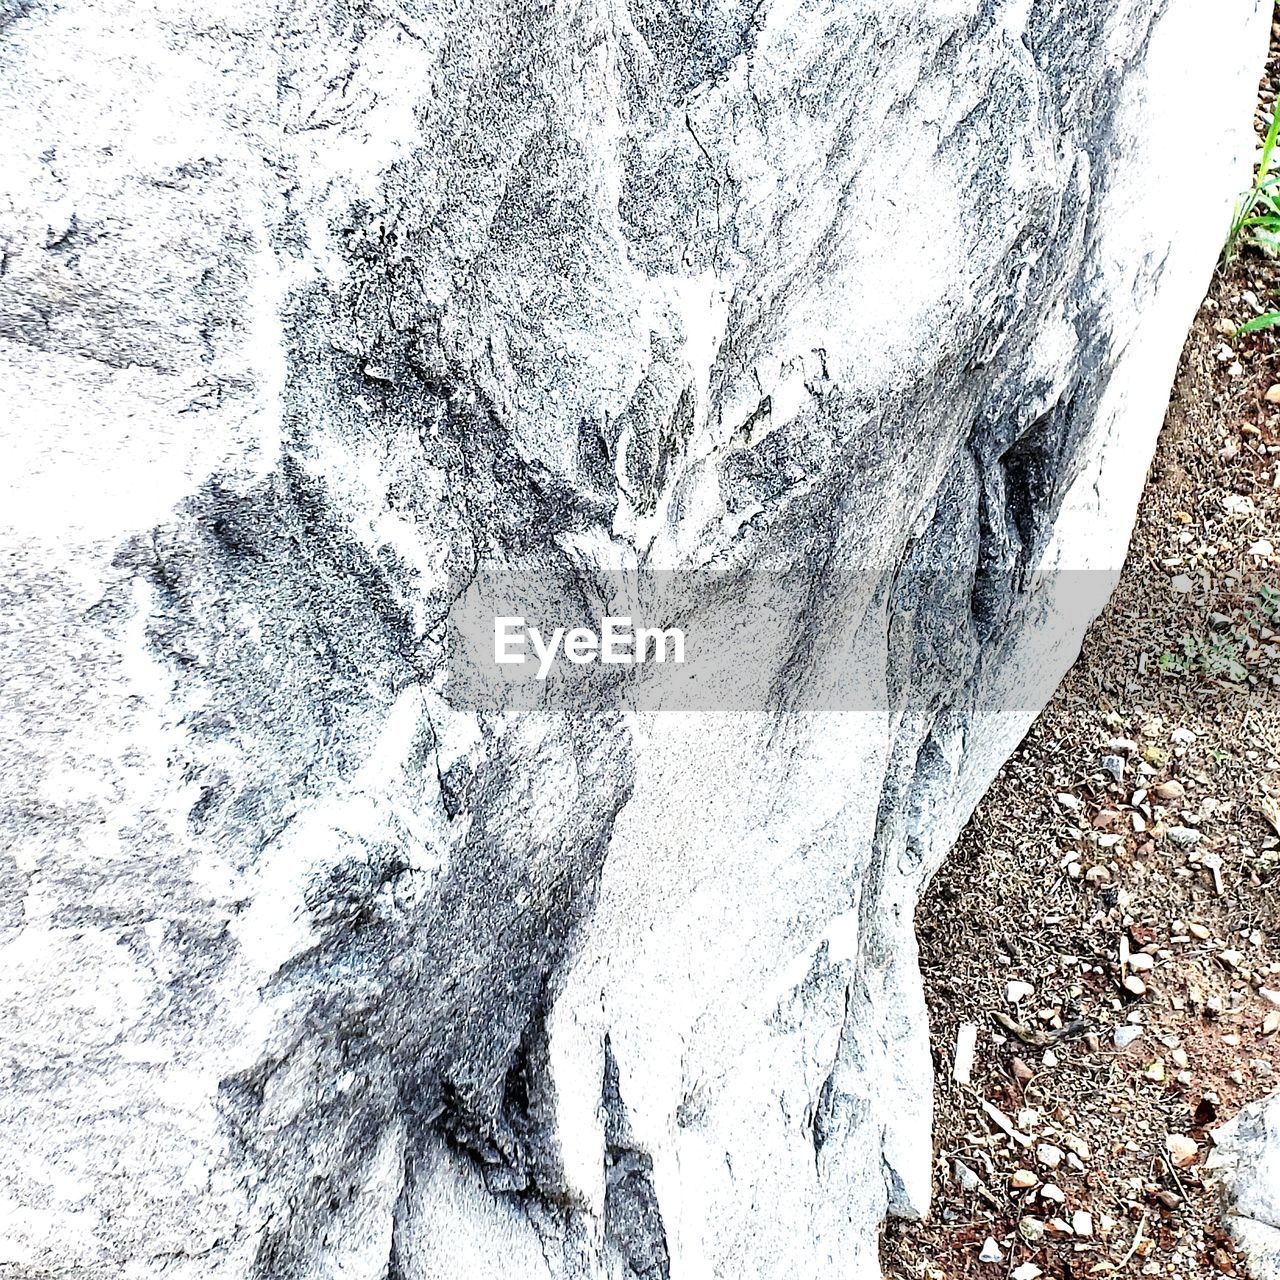 CLOSE-UP OF TREE TRUNK ON ROCKS